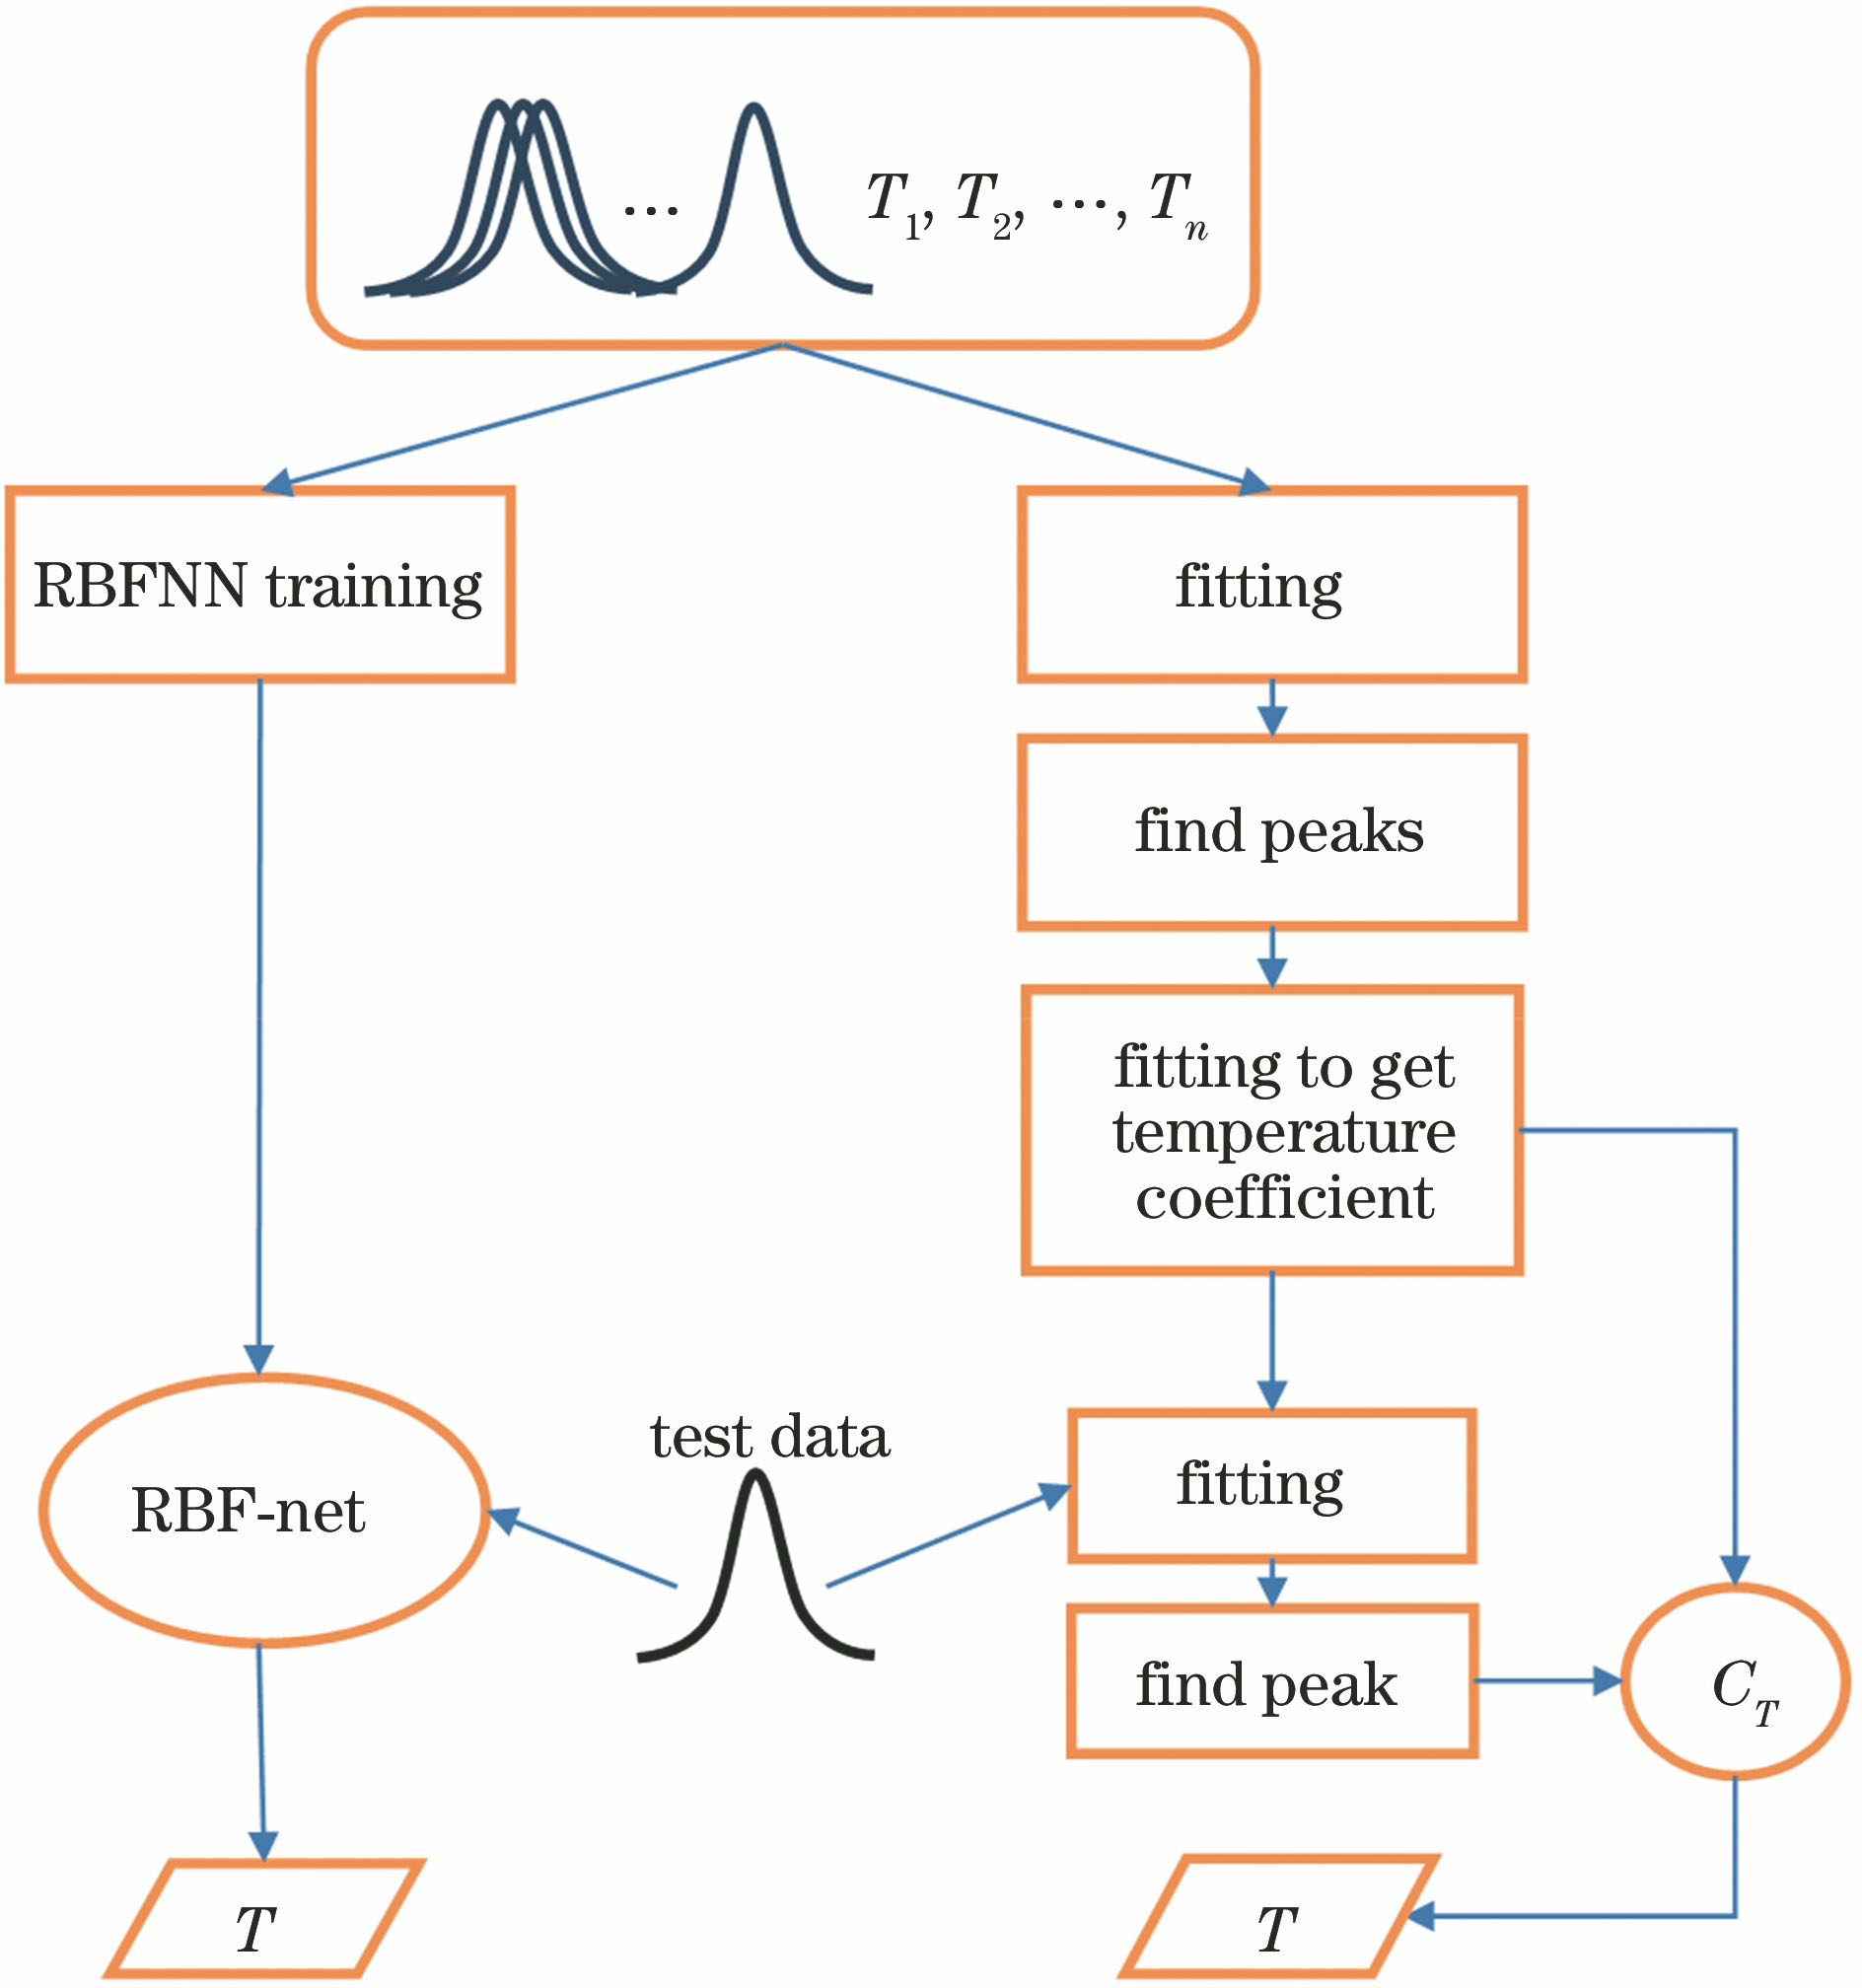 Flow chart of temperature measurements based on RBFNN and fitting methods